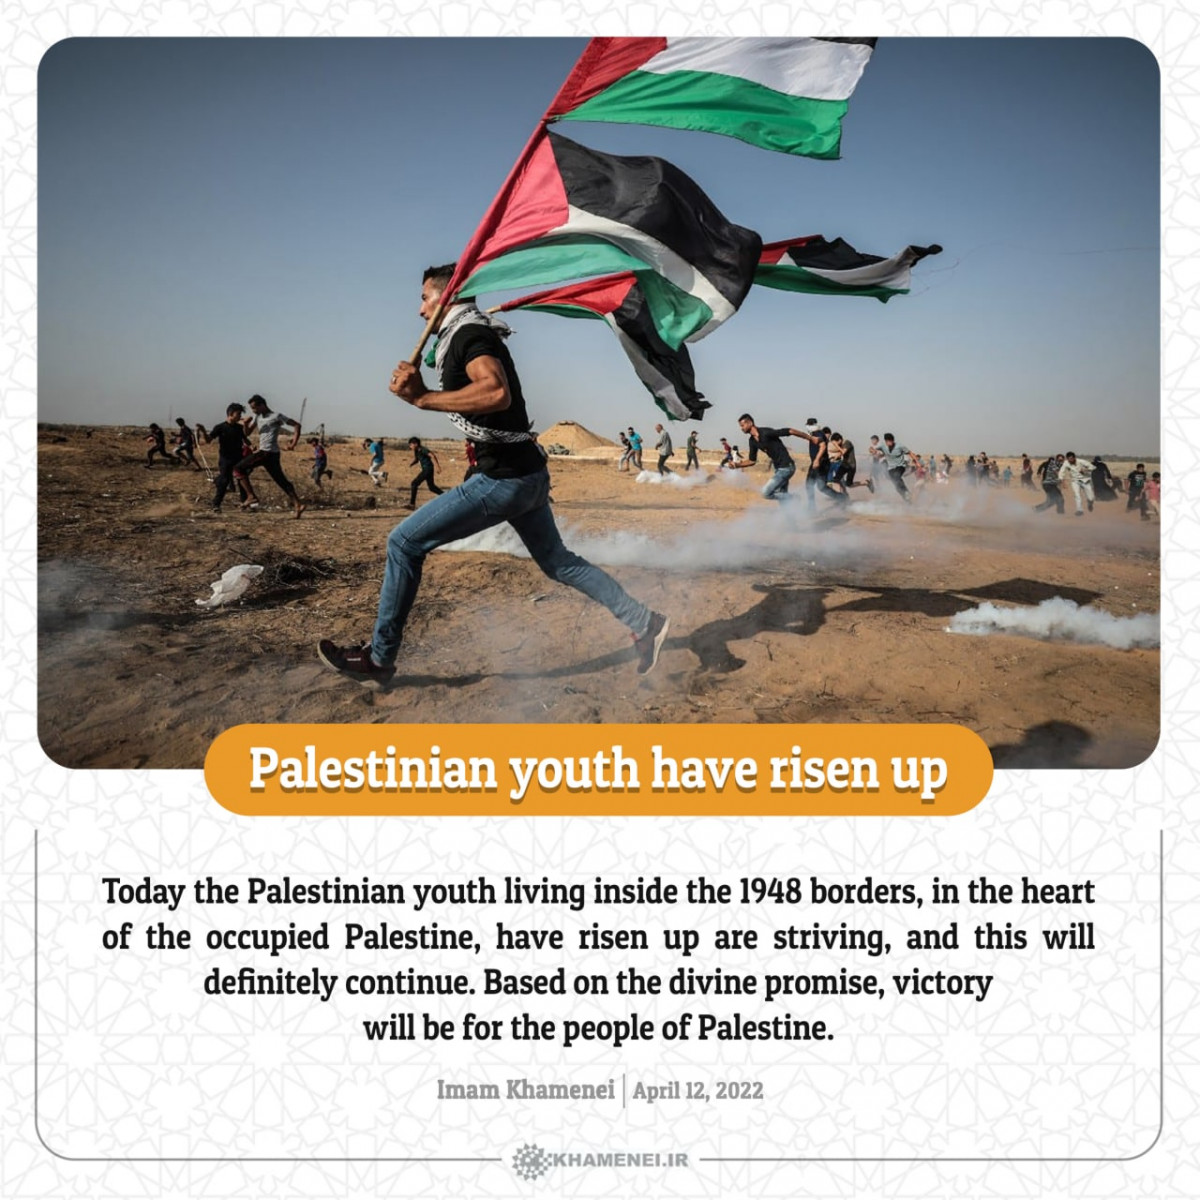 Palestinian youth have risen up